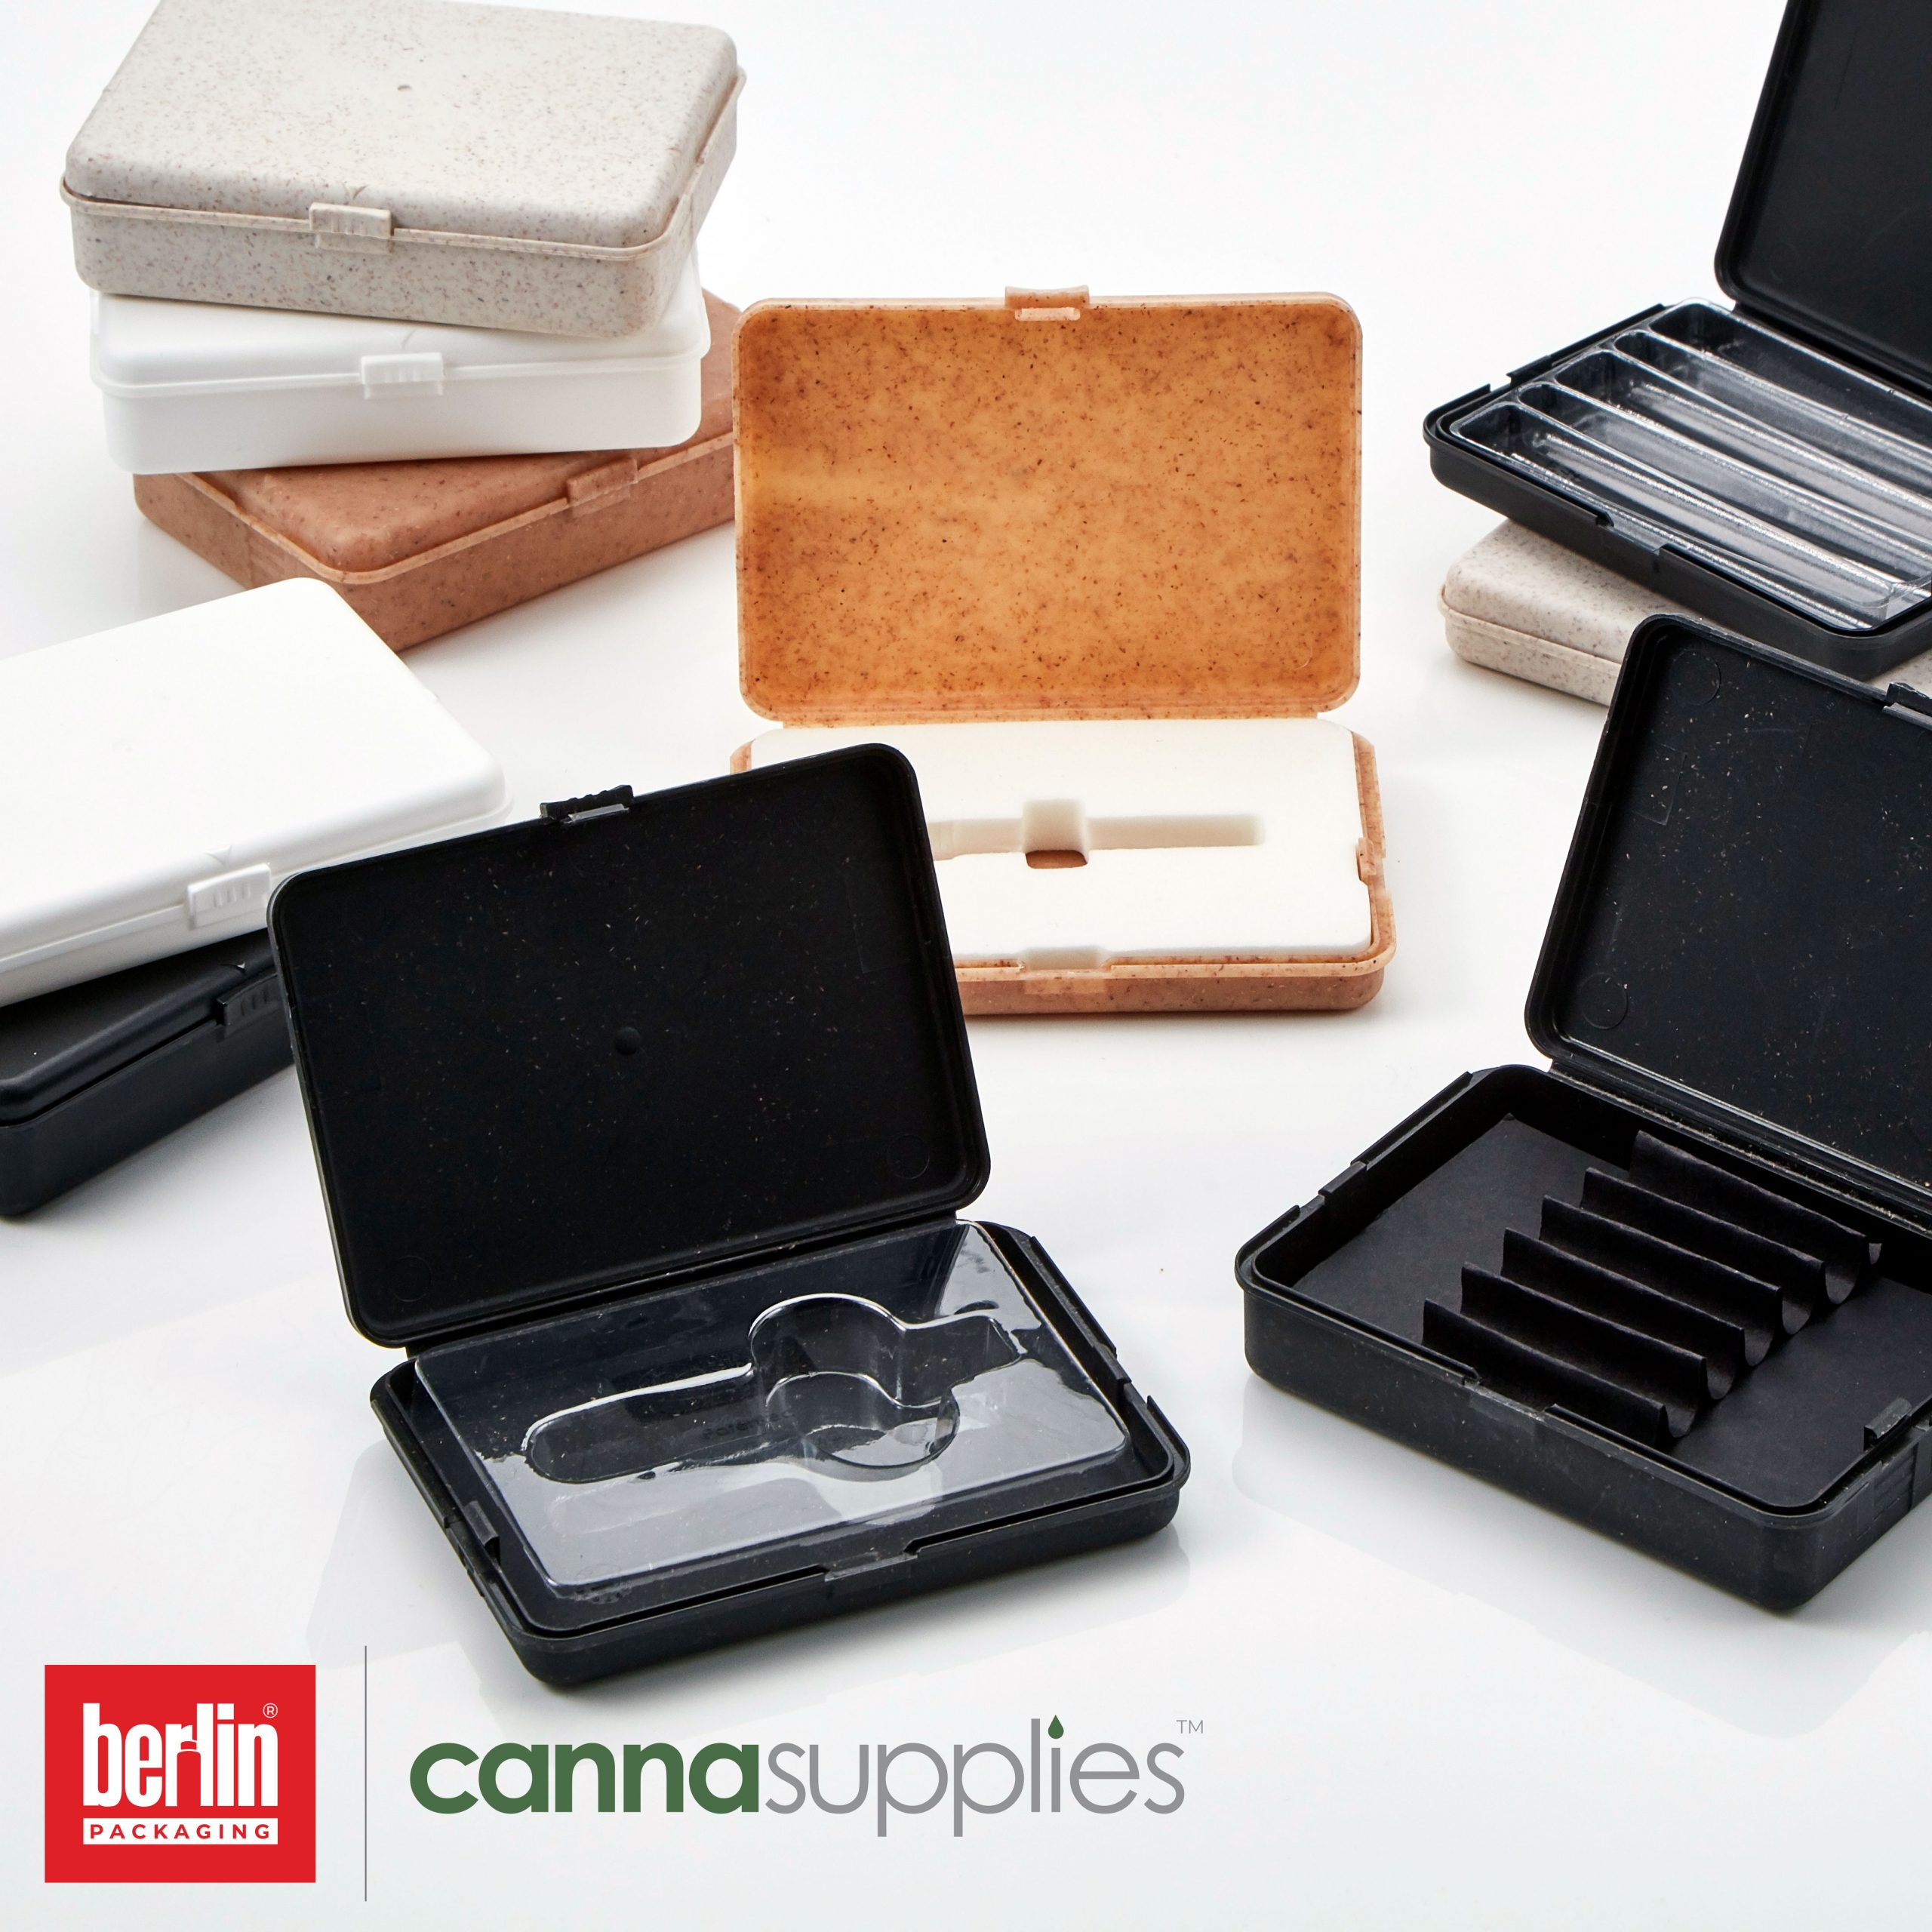 Cannasupplies is a proud preferred Canadian distributor of the CRATIV product series